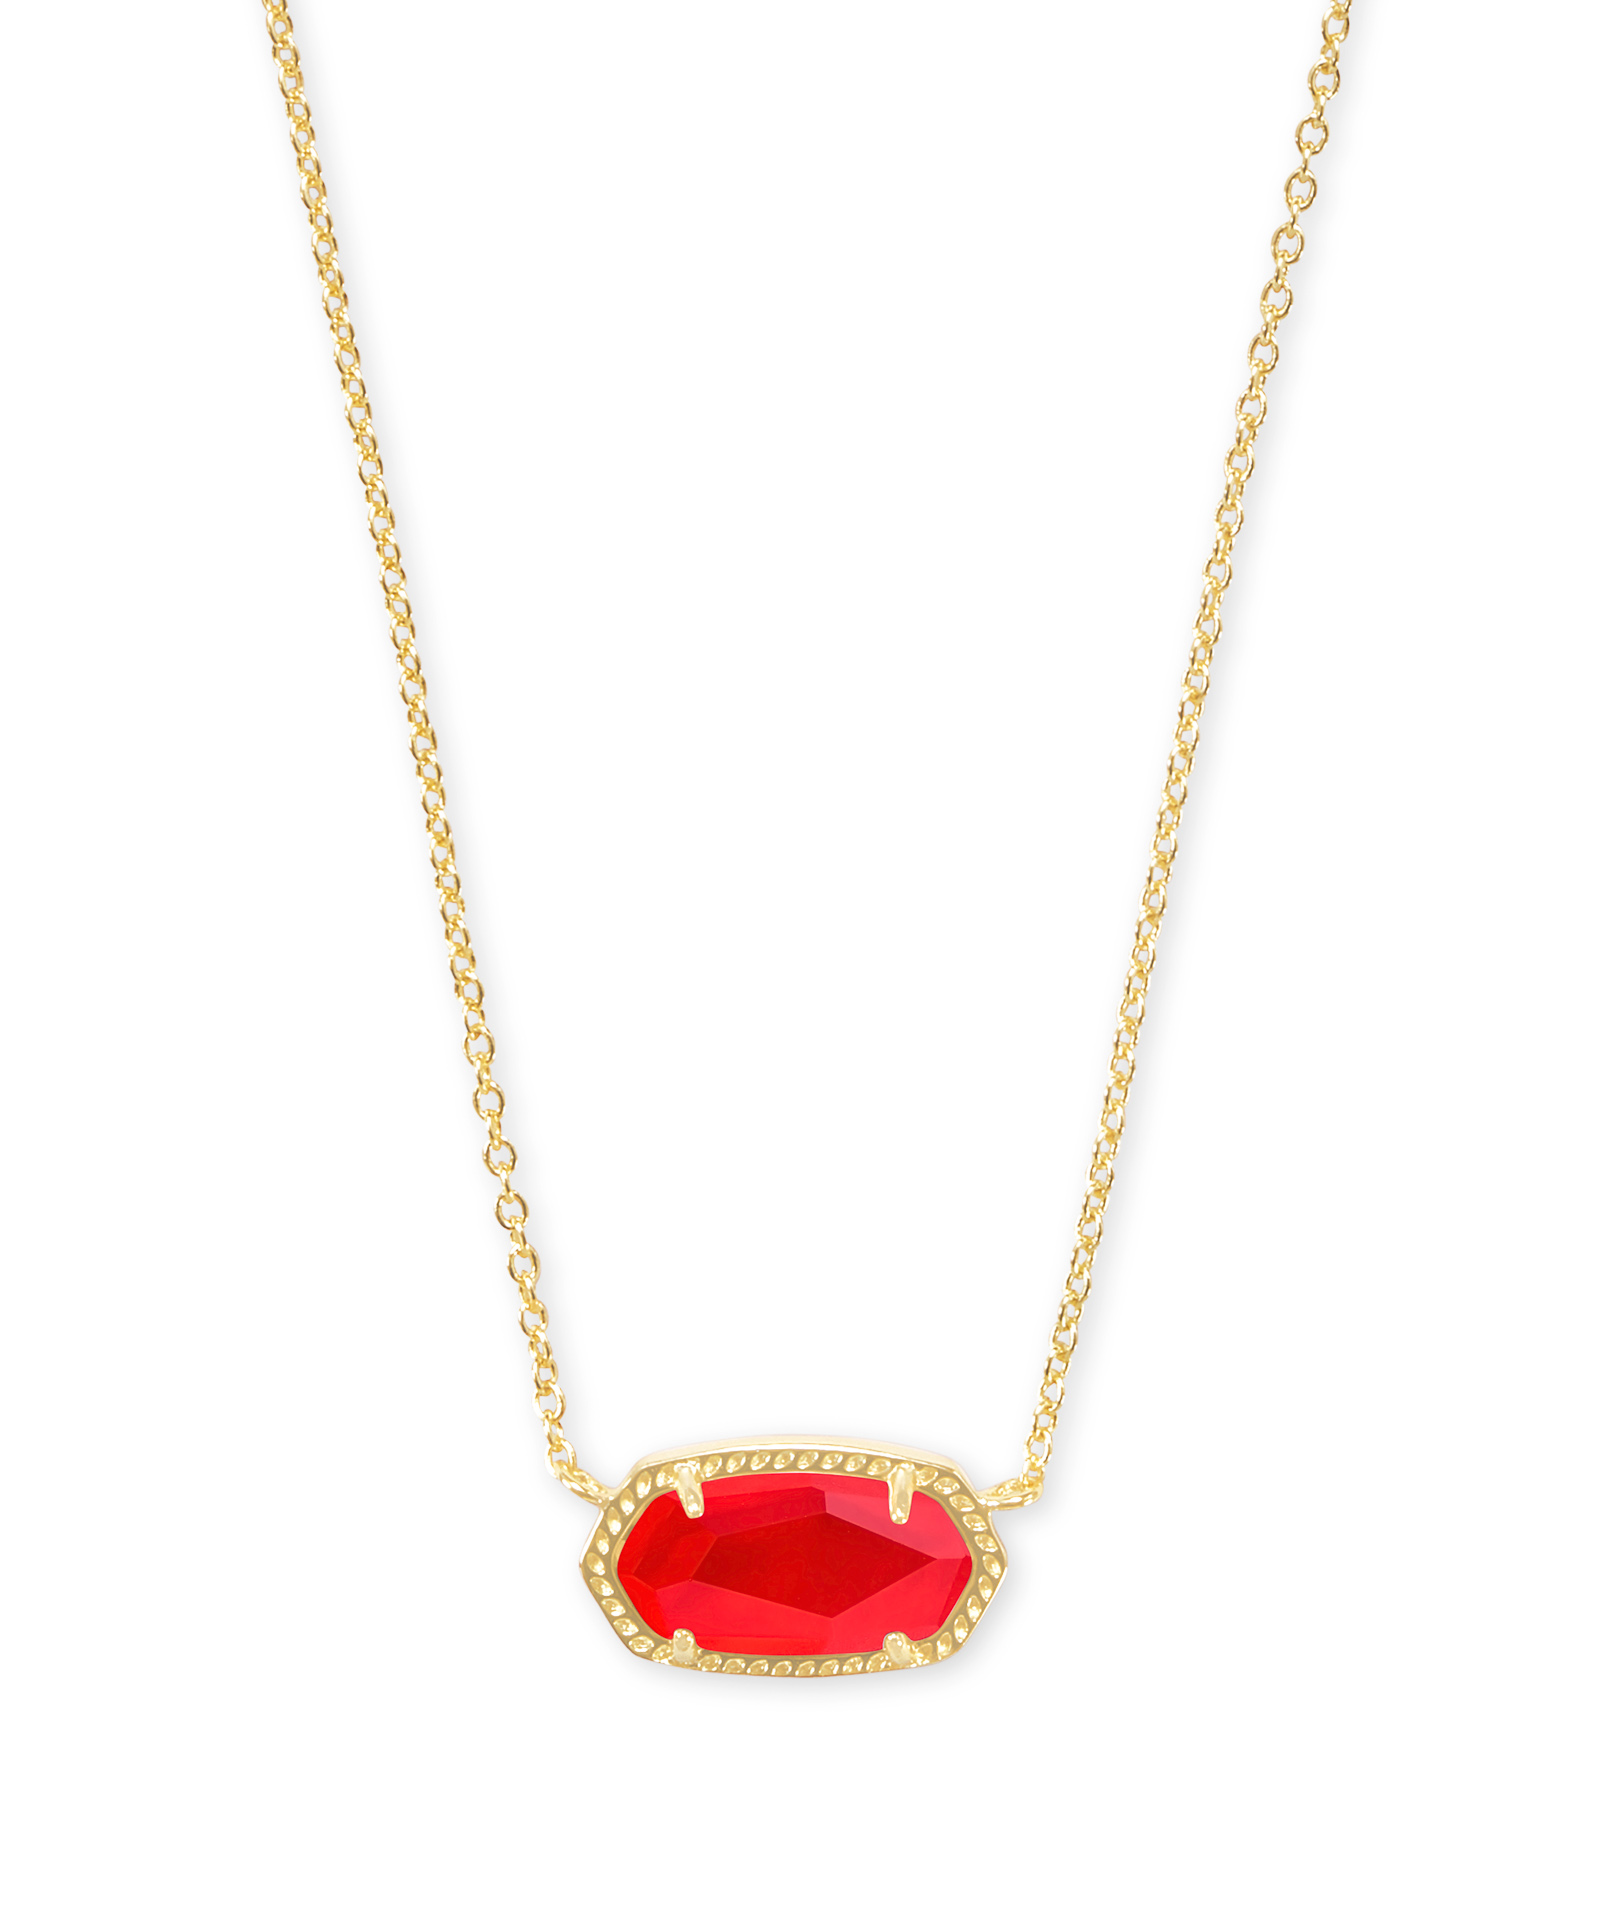 Elisa Gold Pendant Necklace in Red Illusion | Kendra Scott